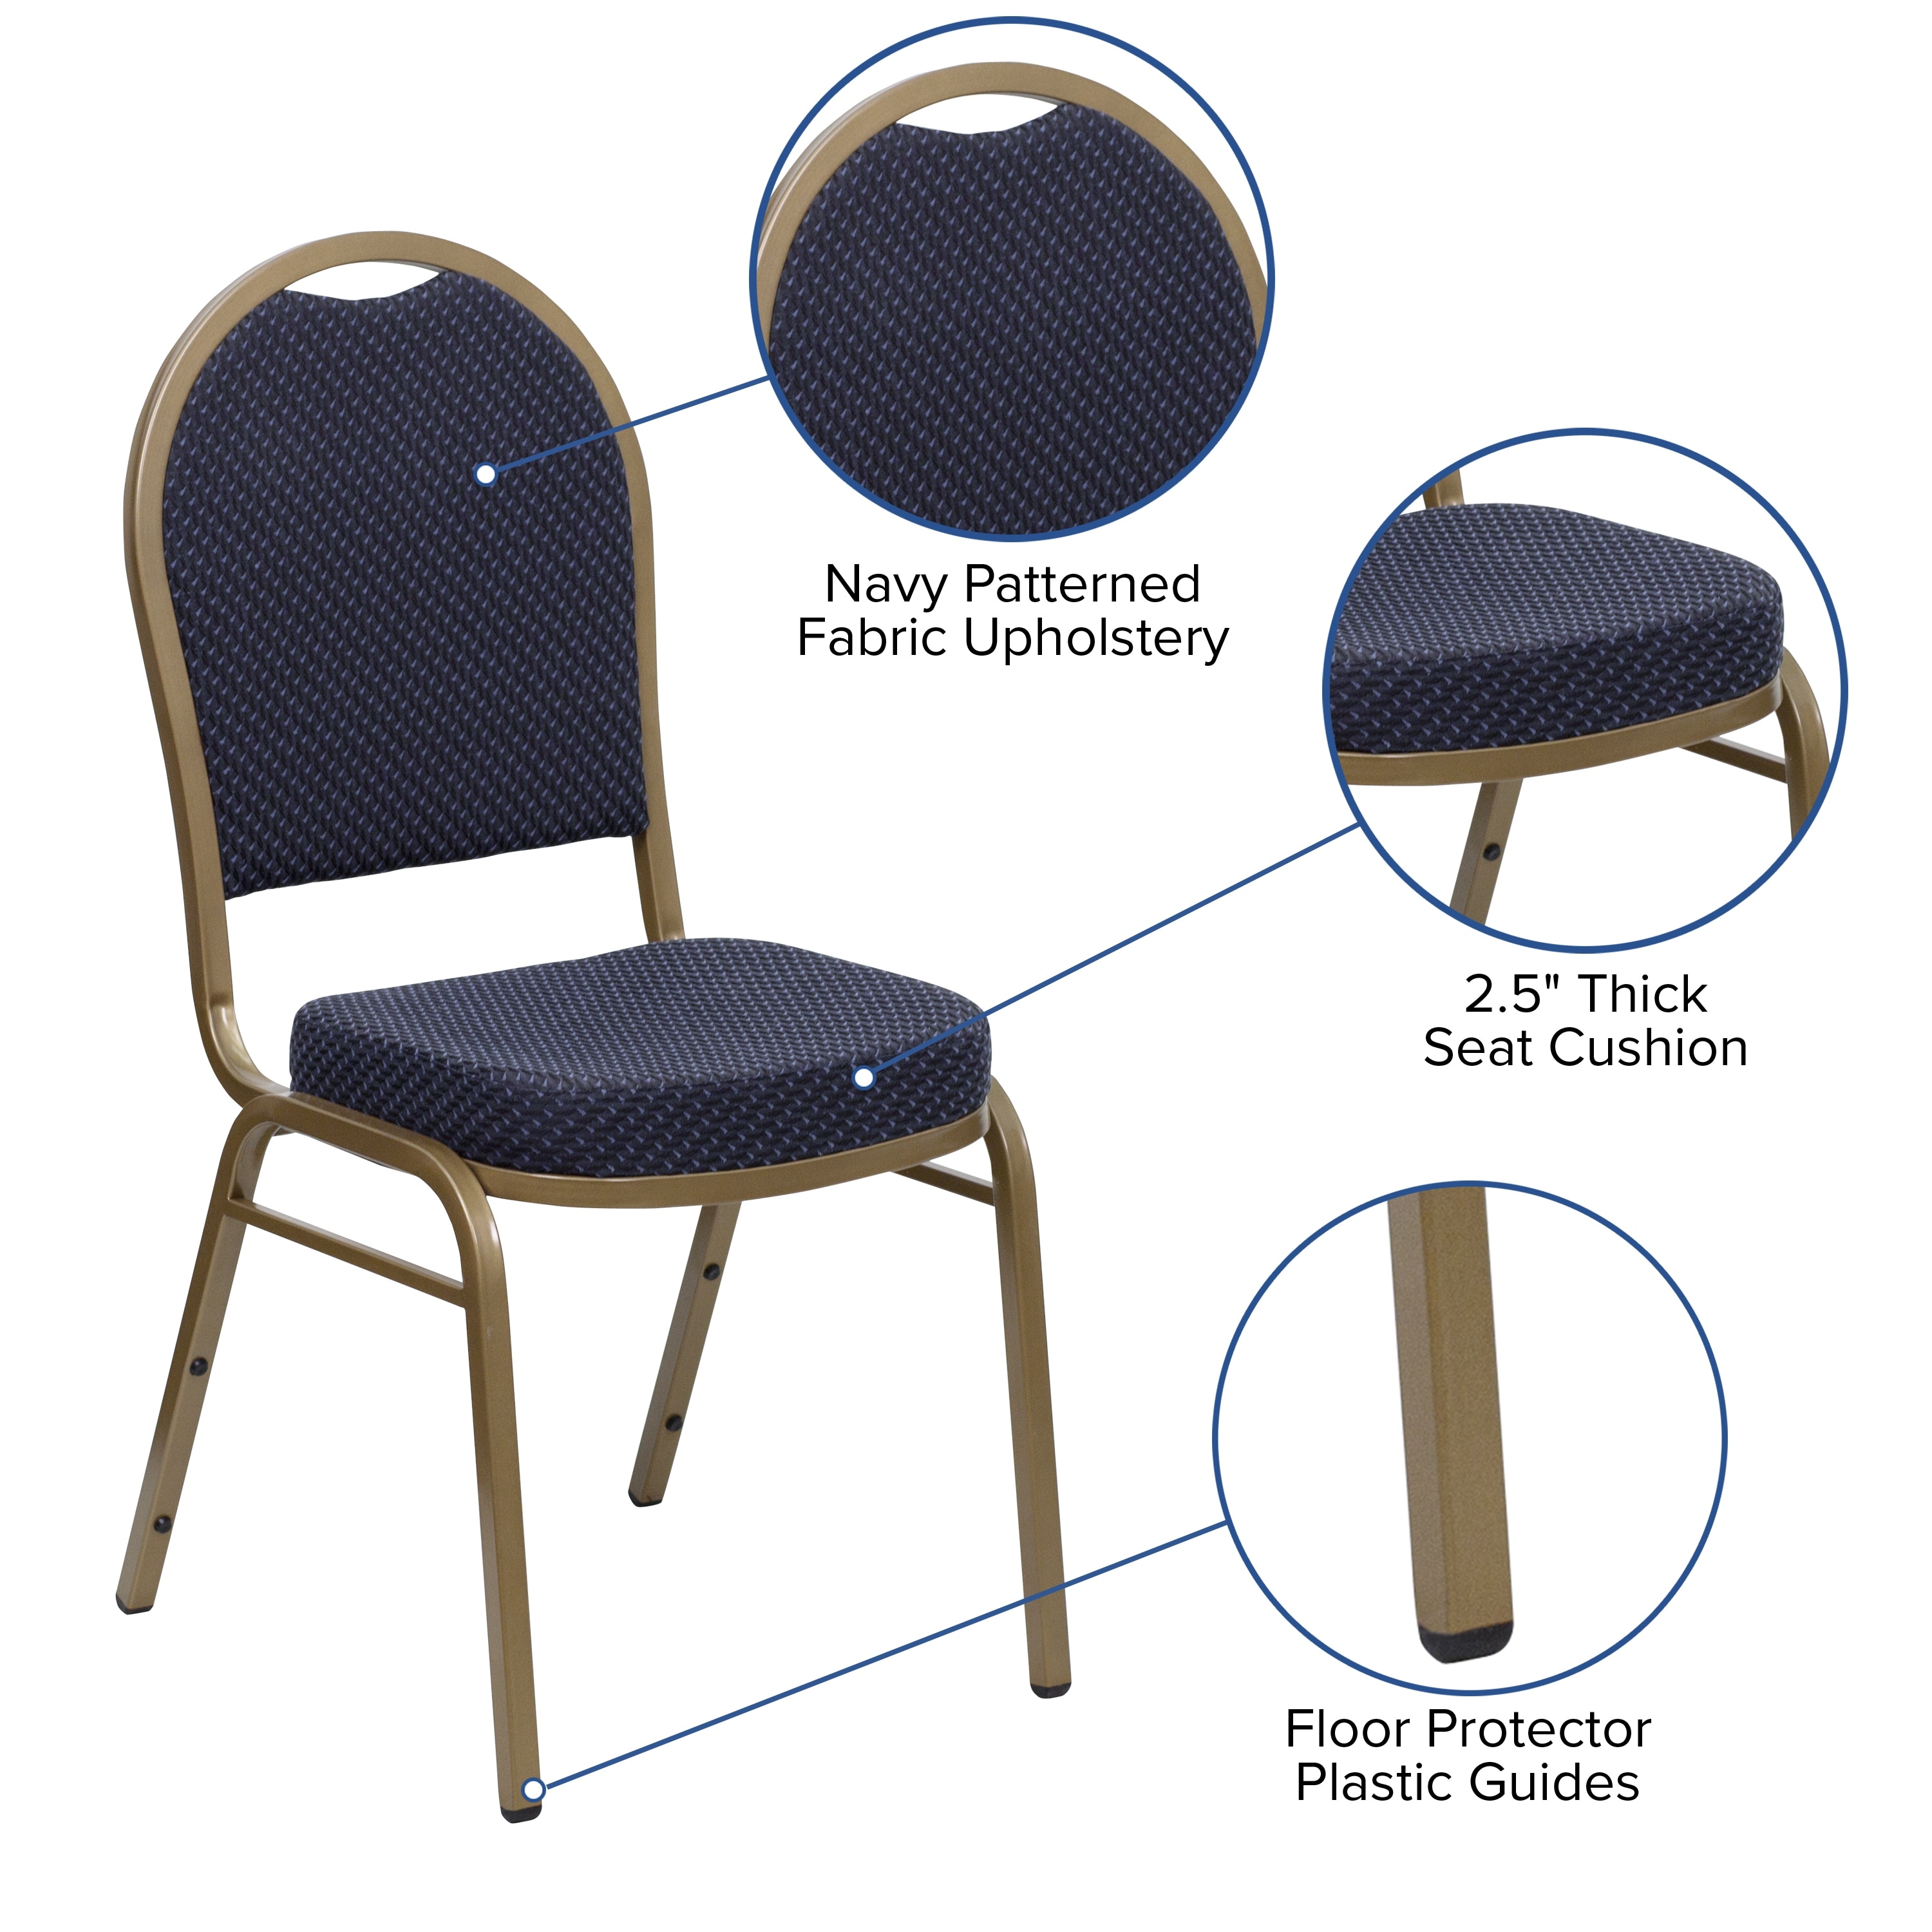 https://ak1.ostkcdn.com/images/products/is/images/direct/9275e3be8ce920e4c2bf9625ab8b923bbe59b38c/Dome-Back-Stacking-Banquet-Chair.jpg